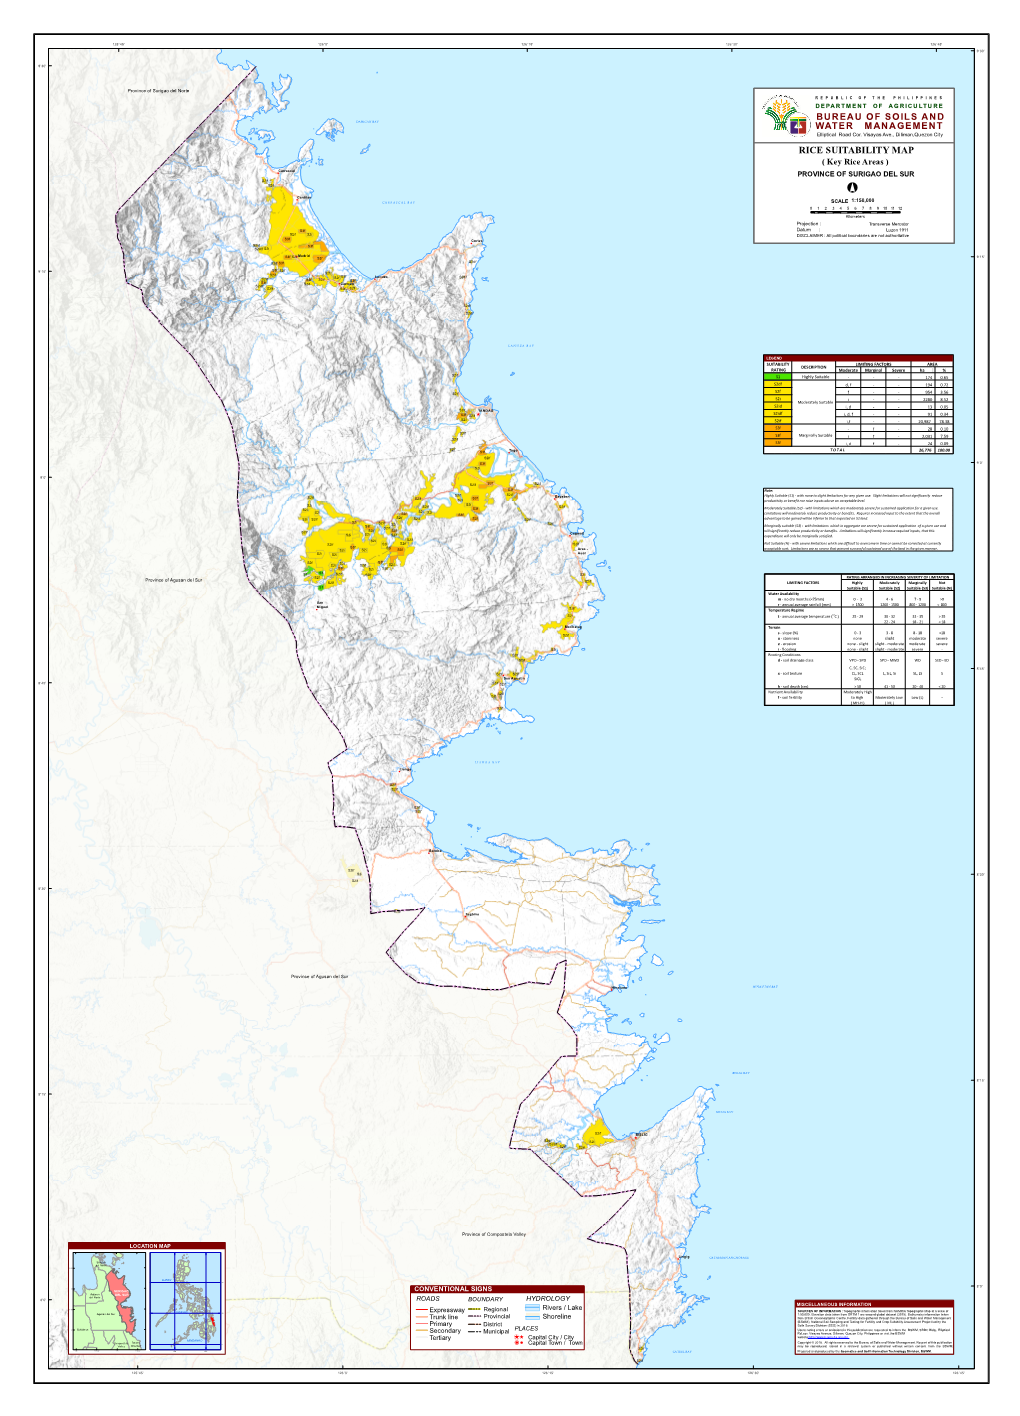 RICE SUITABILITY MAP ( Key Rice Areas ) Carrascal ! PROVINCE of SURIGAO DEL SUR S2if S2if °